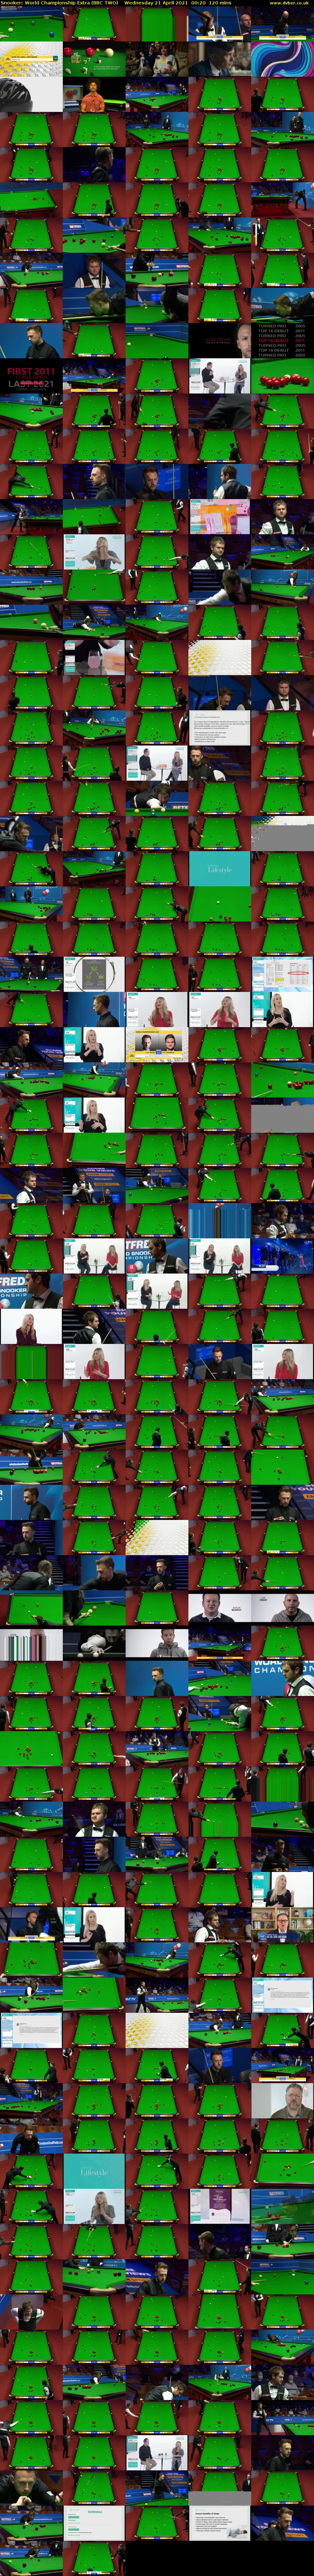 Snooker: World Championship Extra (BBC TWO) Wednesday 21 April 2021 00:20 - 02:20